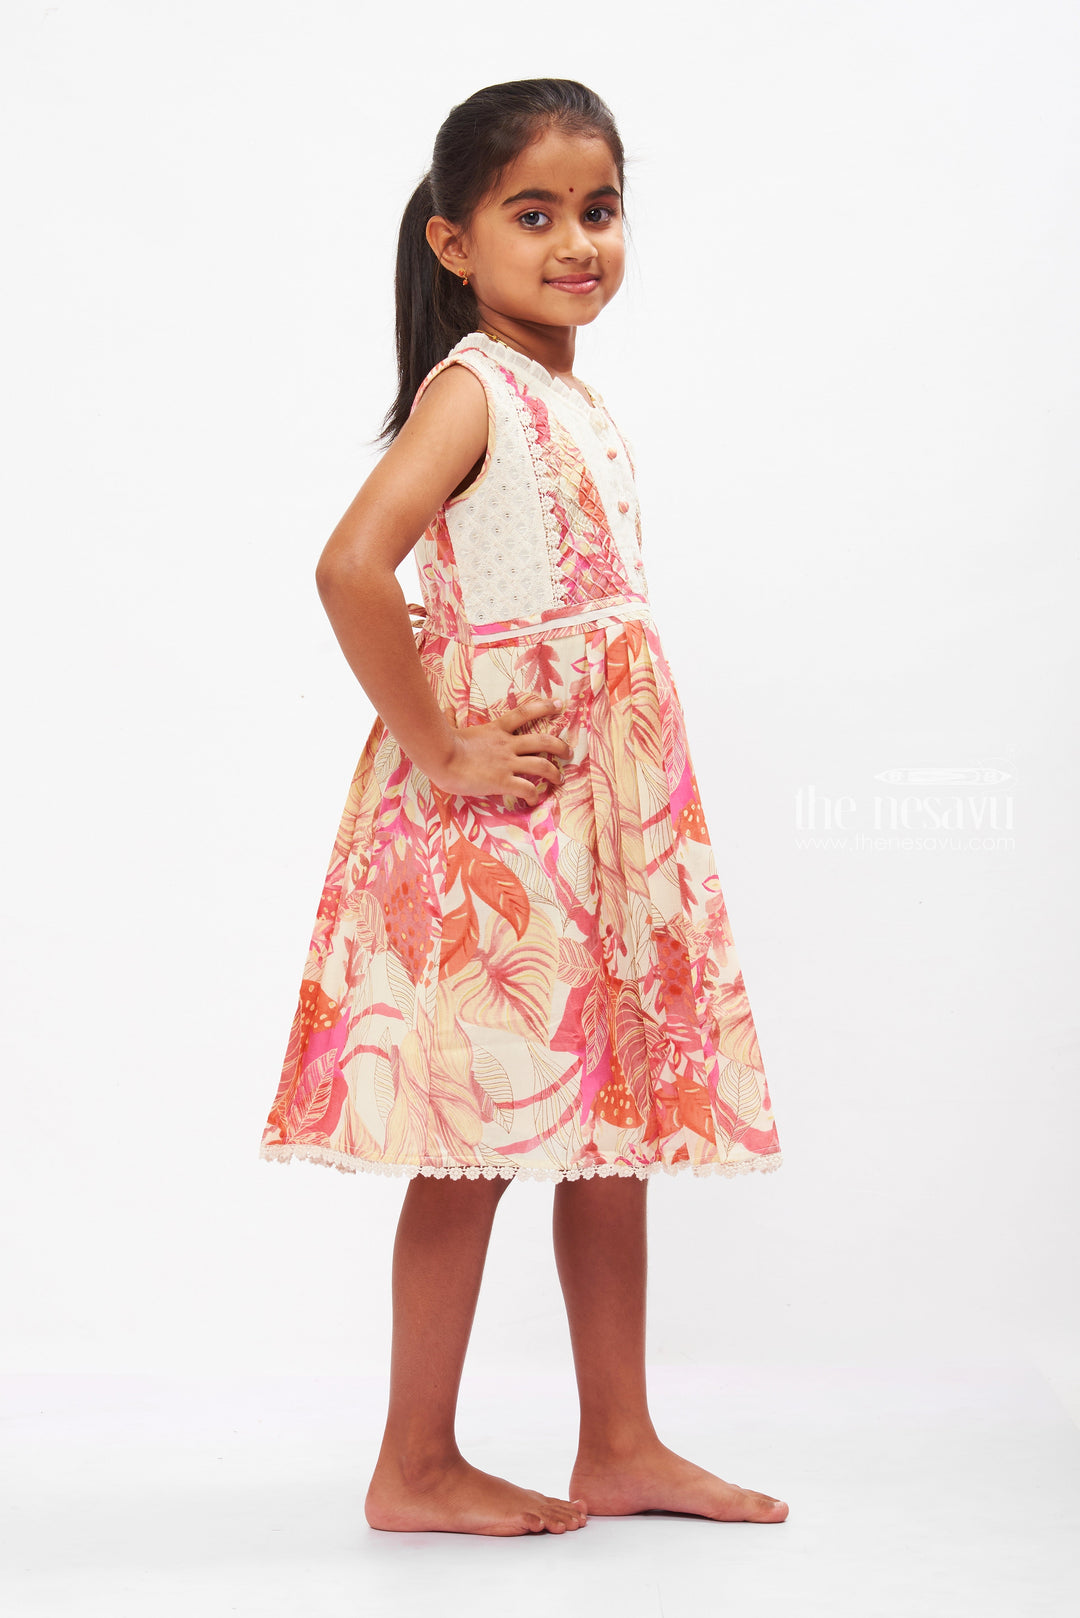 The Nesavu Girls Cotton Frock Girls Tropical Paradise Cotton Frock with Delicate Lace Accents Nesavu Exotic Leaf Print Cotton Frock for Girls | Summer Floral Elegance | The Nesavu